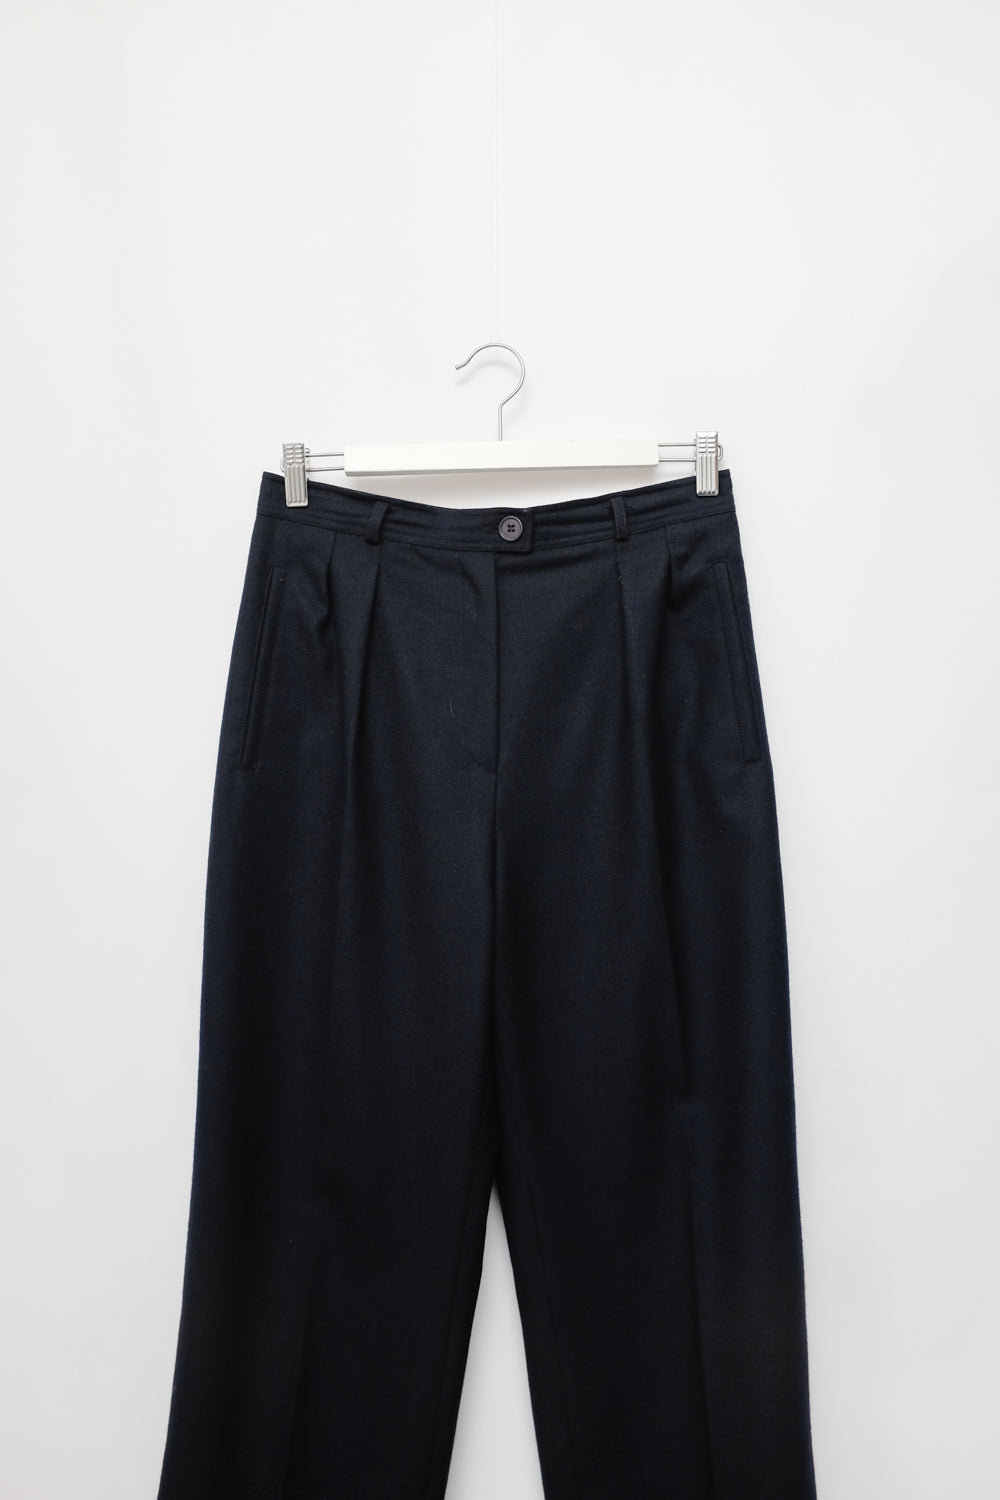 PURE WOOL NAVY PLEATED PANTS